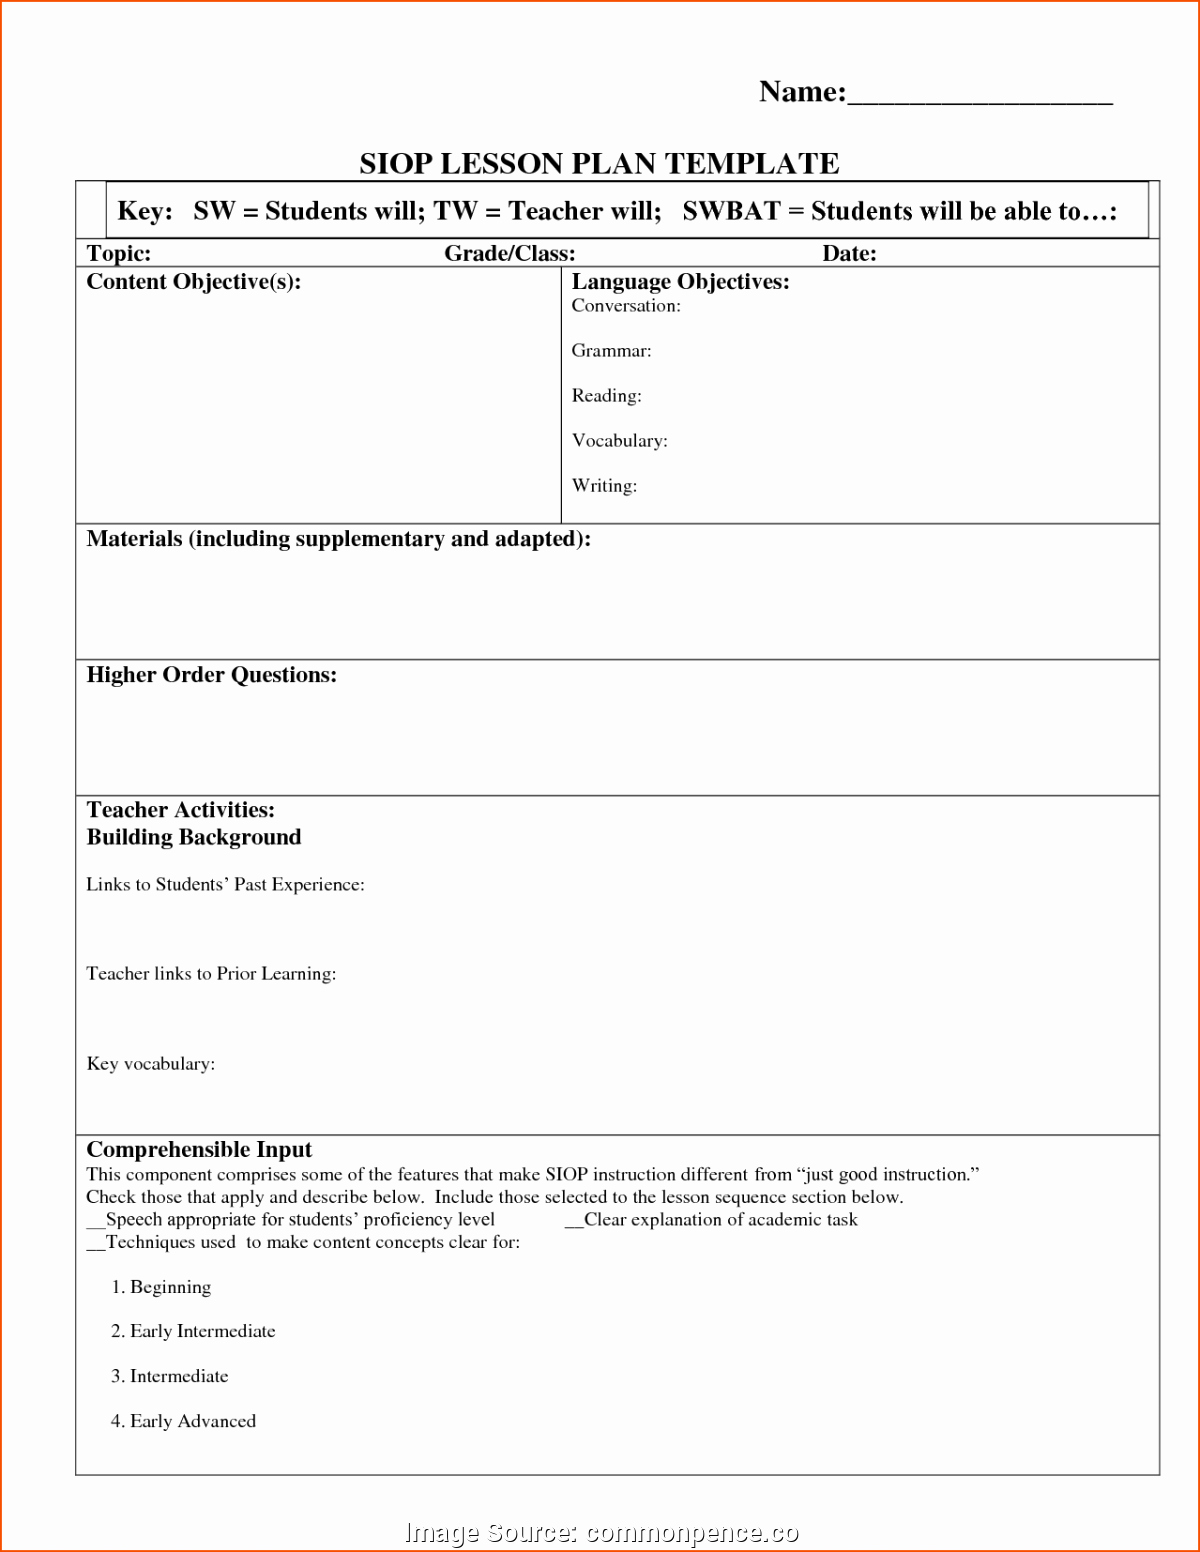 Siop Model Lesson Plan Fresh Valuable Siop Lesson Plan Template 2 Pearson Siop Model